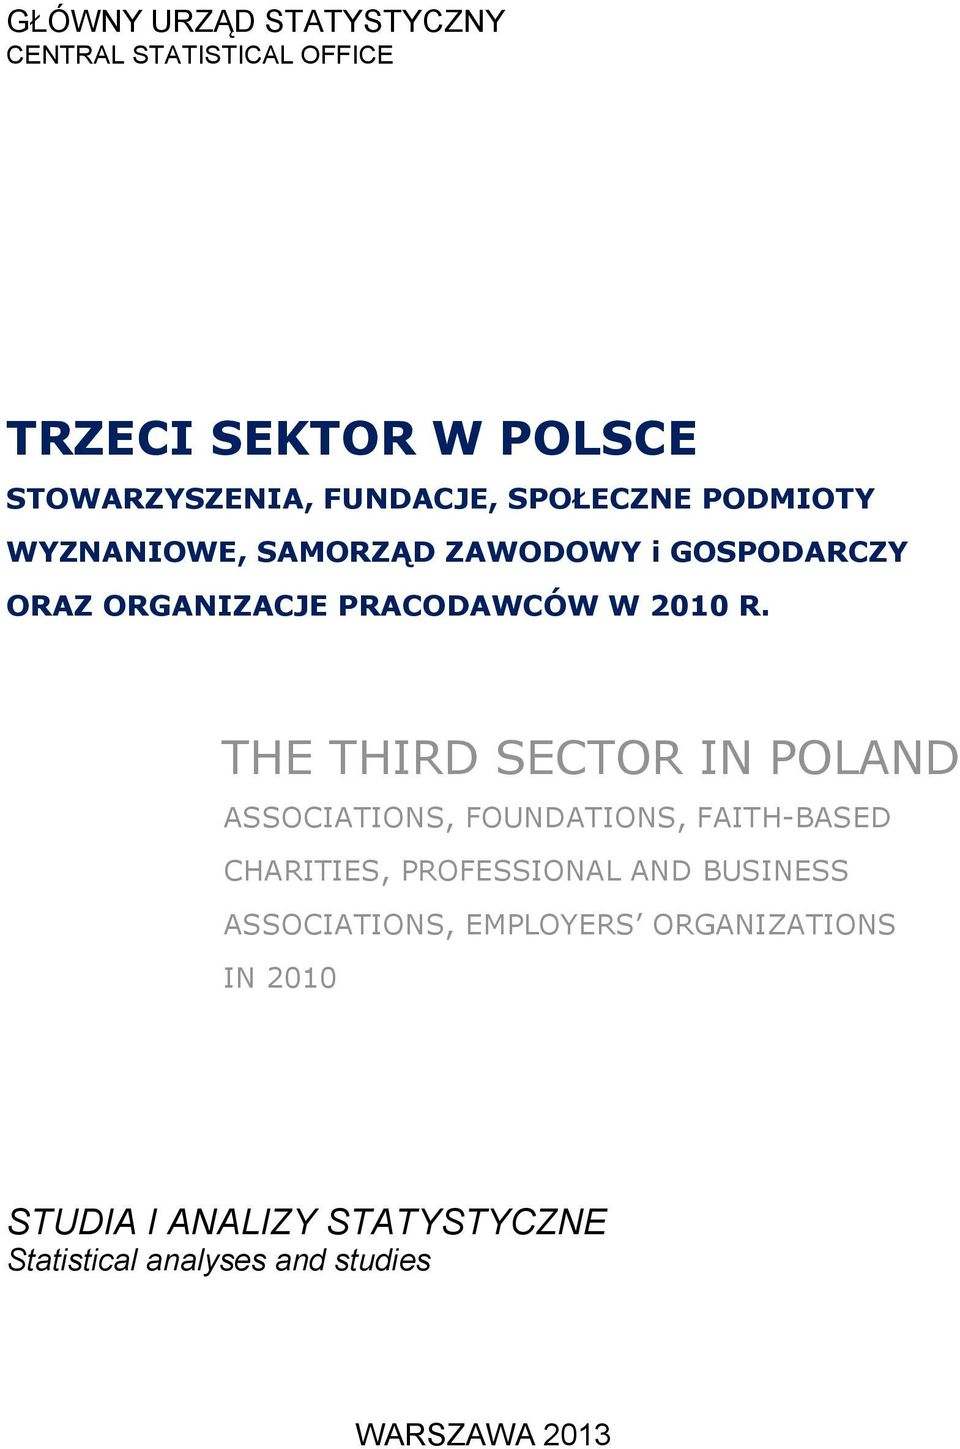 THE THIRD SECTOR IN POLAND ASSOCIATIONS, FOUNDATIONS, FAITH-BASED CHARITIES, PROFESSIONAL AND BUSINESS